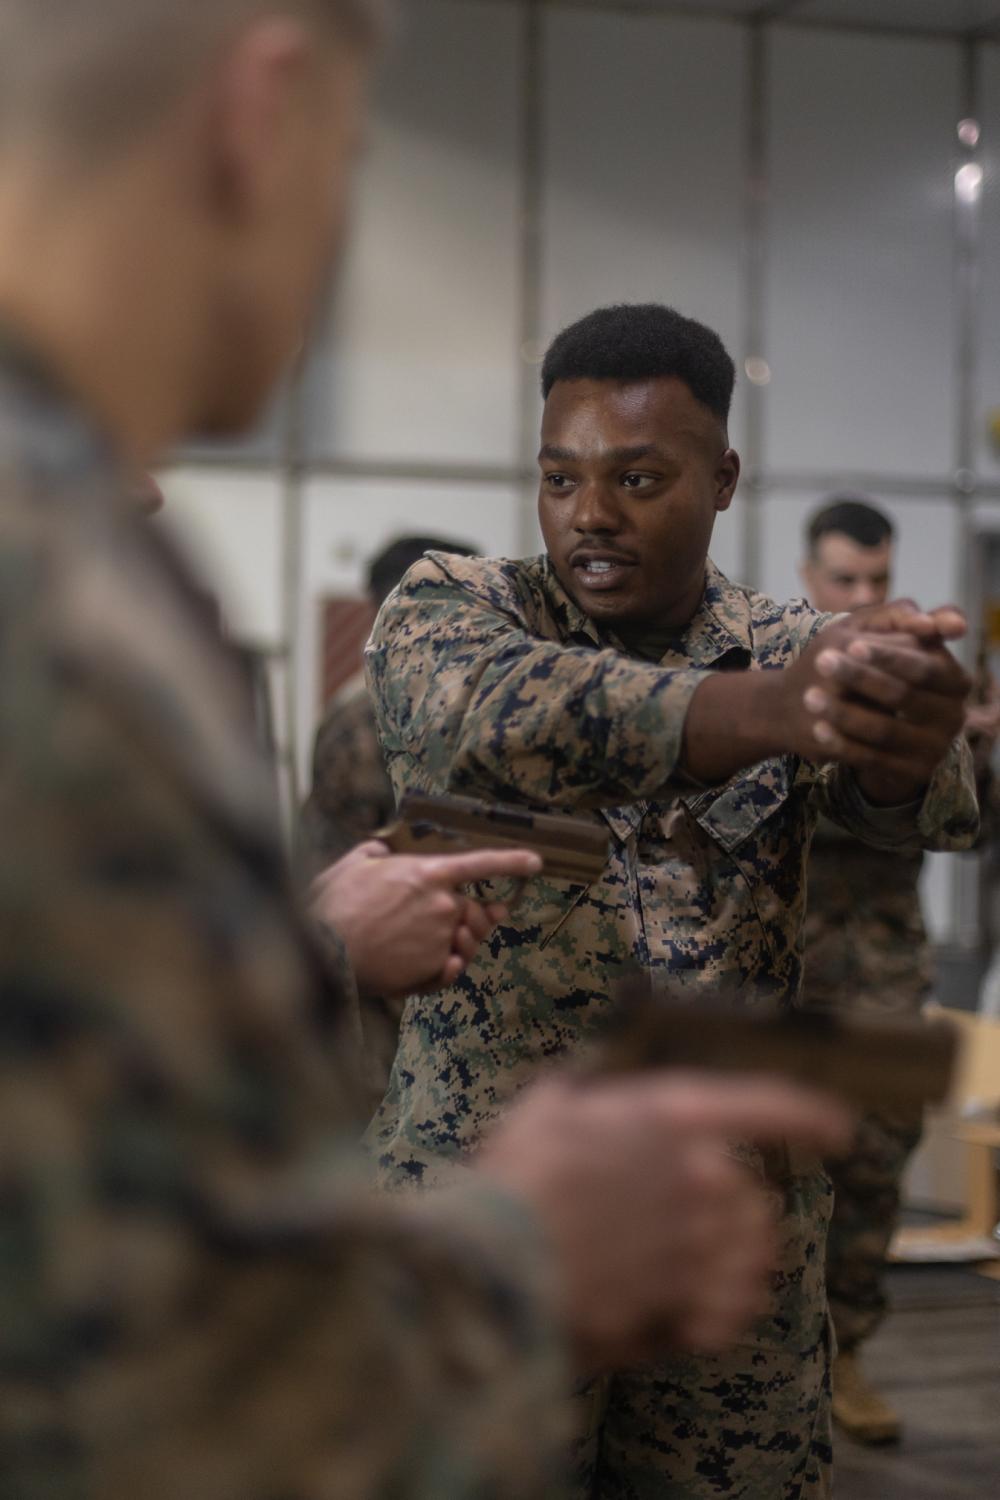 II Marine Expeditionary Force M18 Familiarization Course